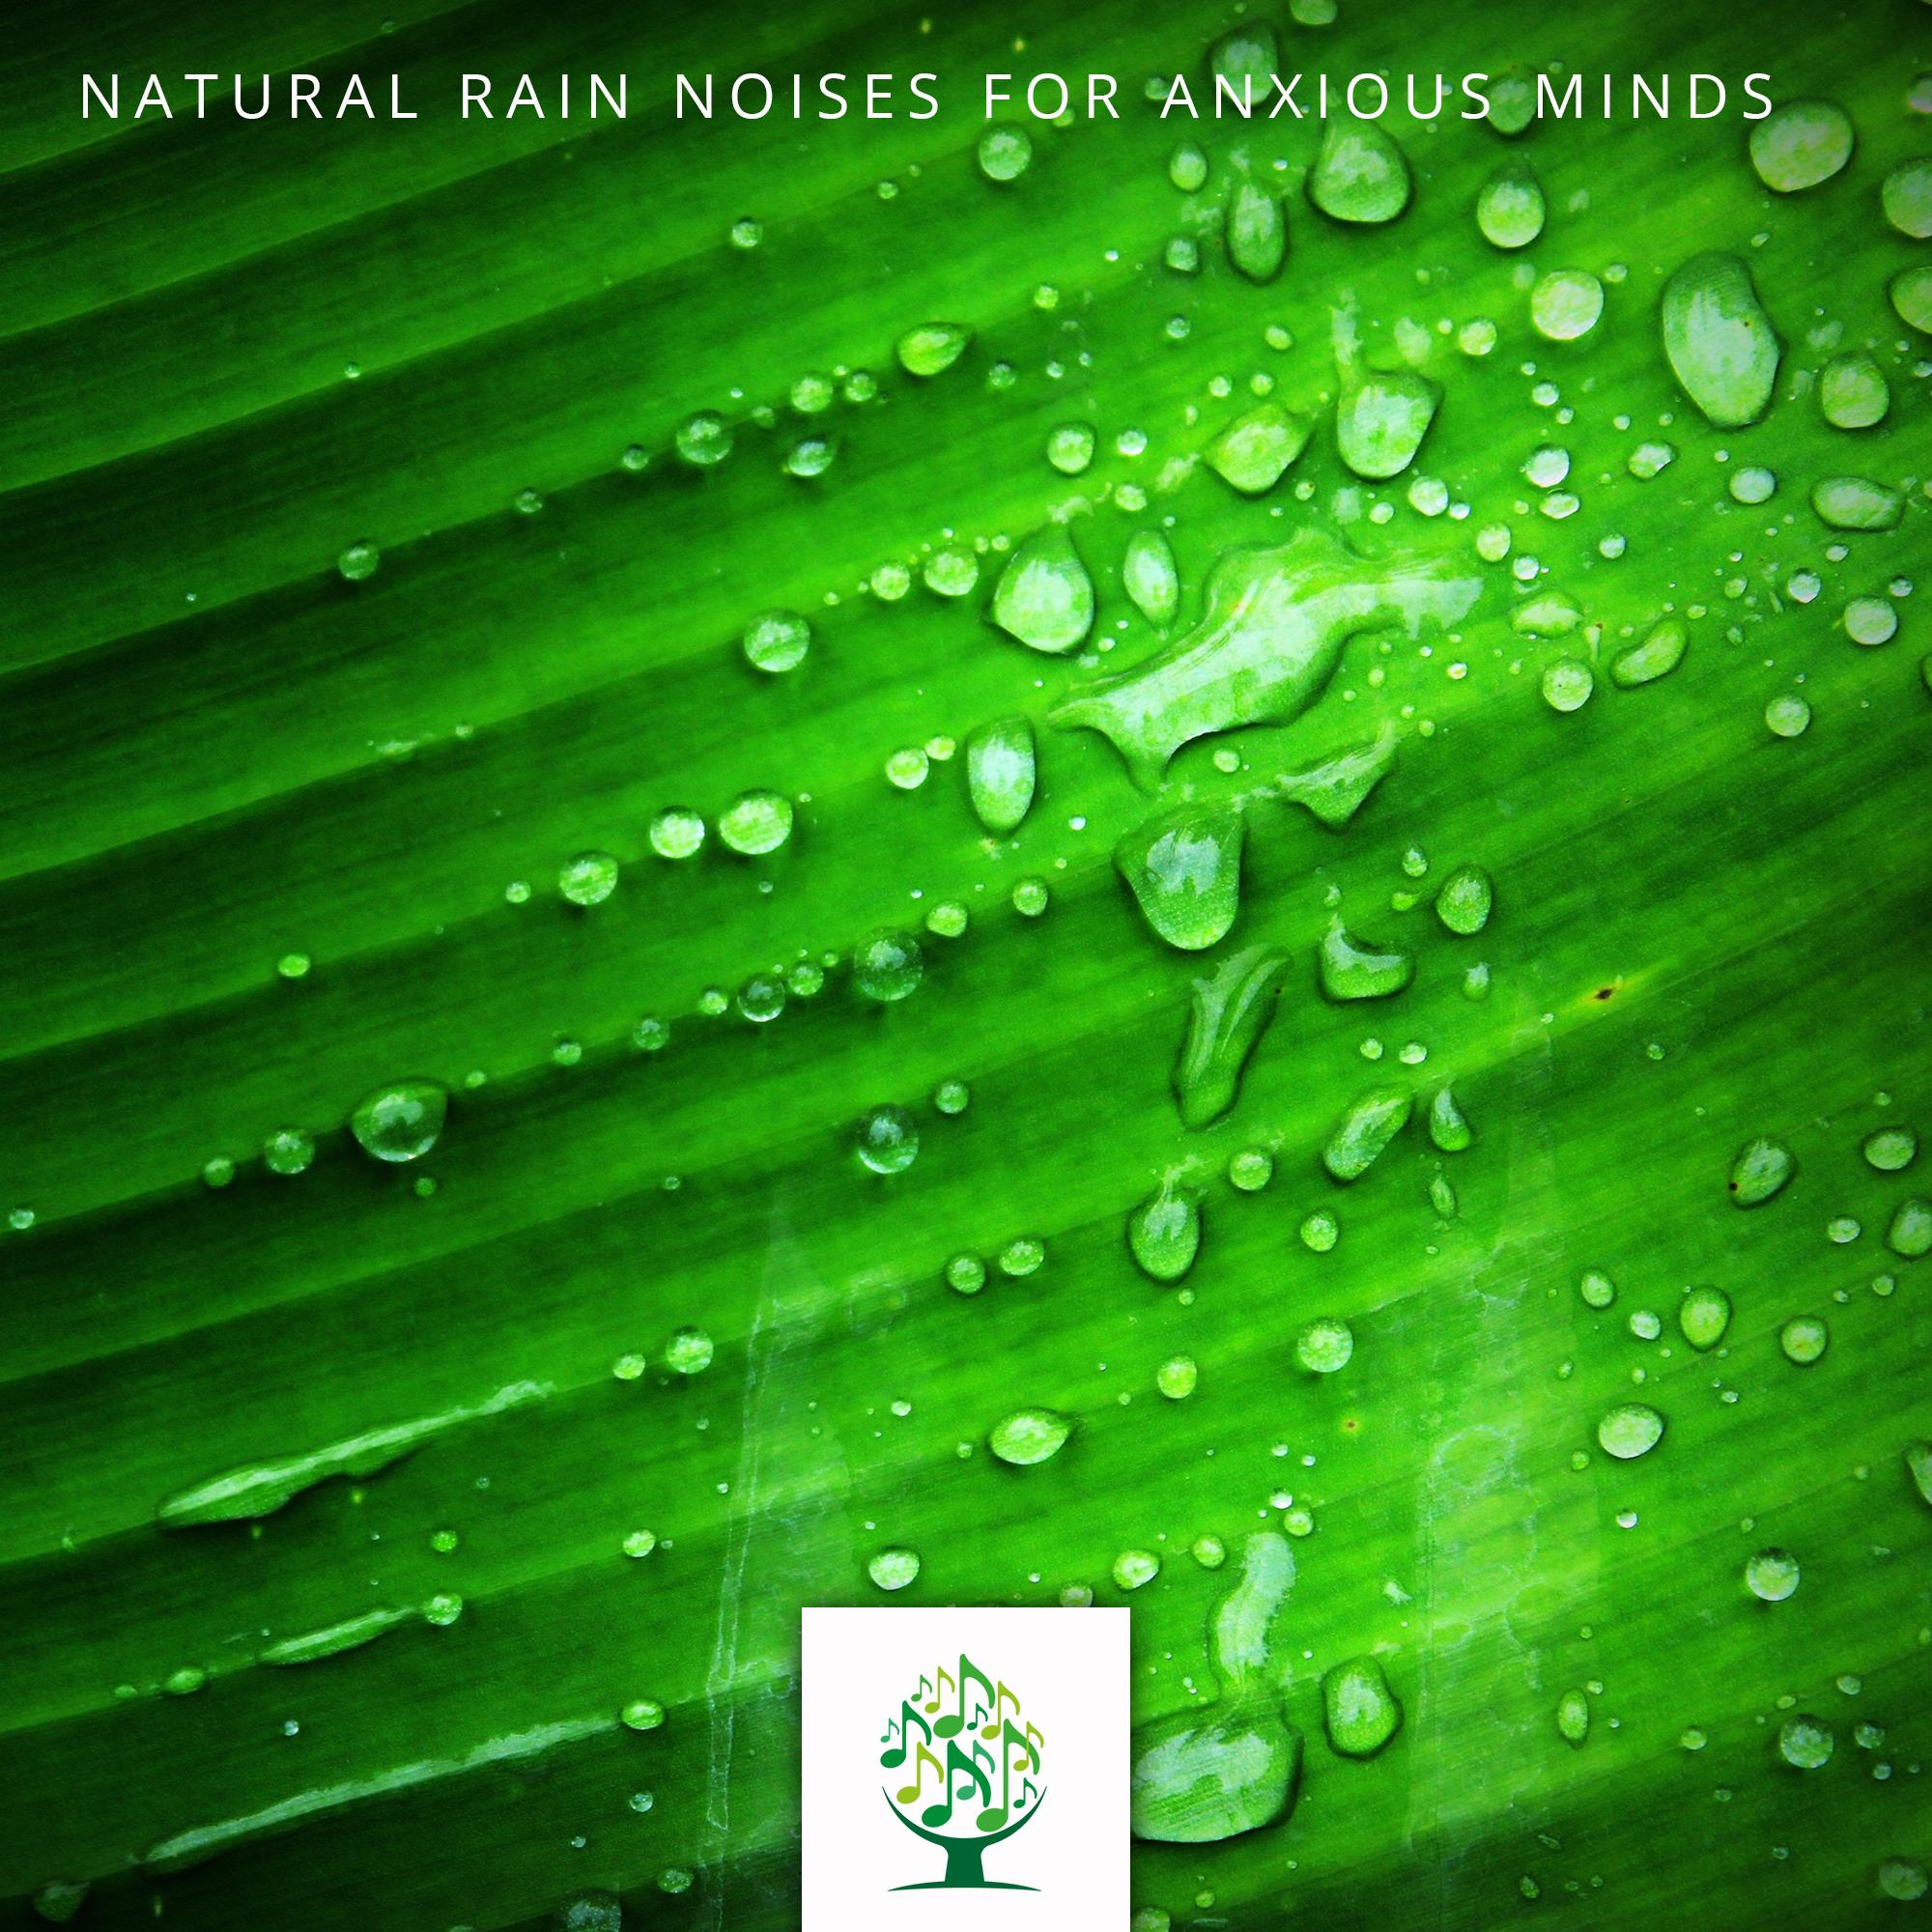 Natural Rain Noises for Anxious Minds